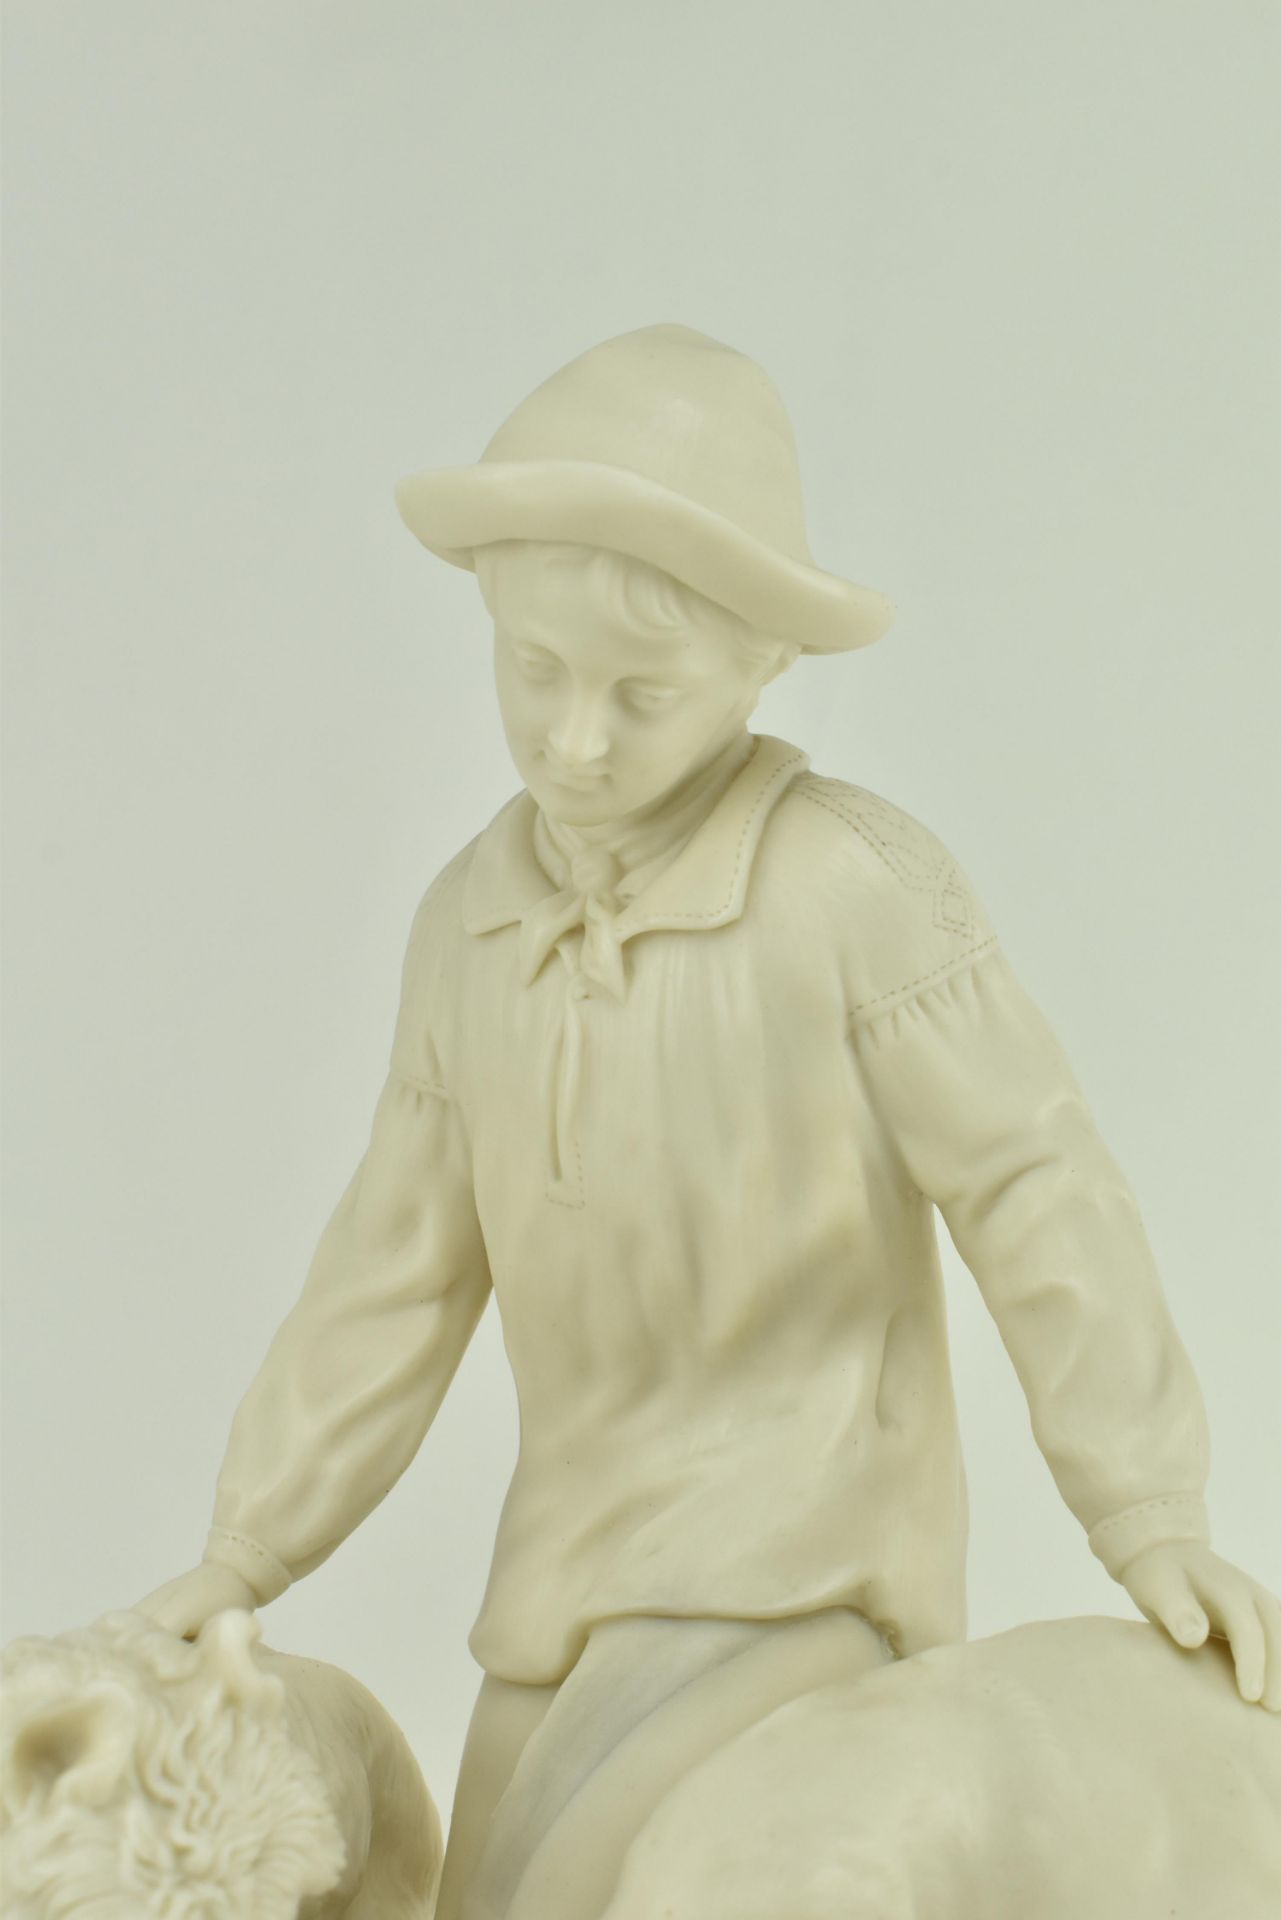 COPELAND AFTER P J. MENE - PARIAN WARE HUNTING FIGURE - Image 2 of 7